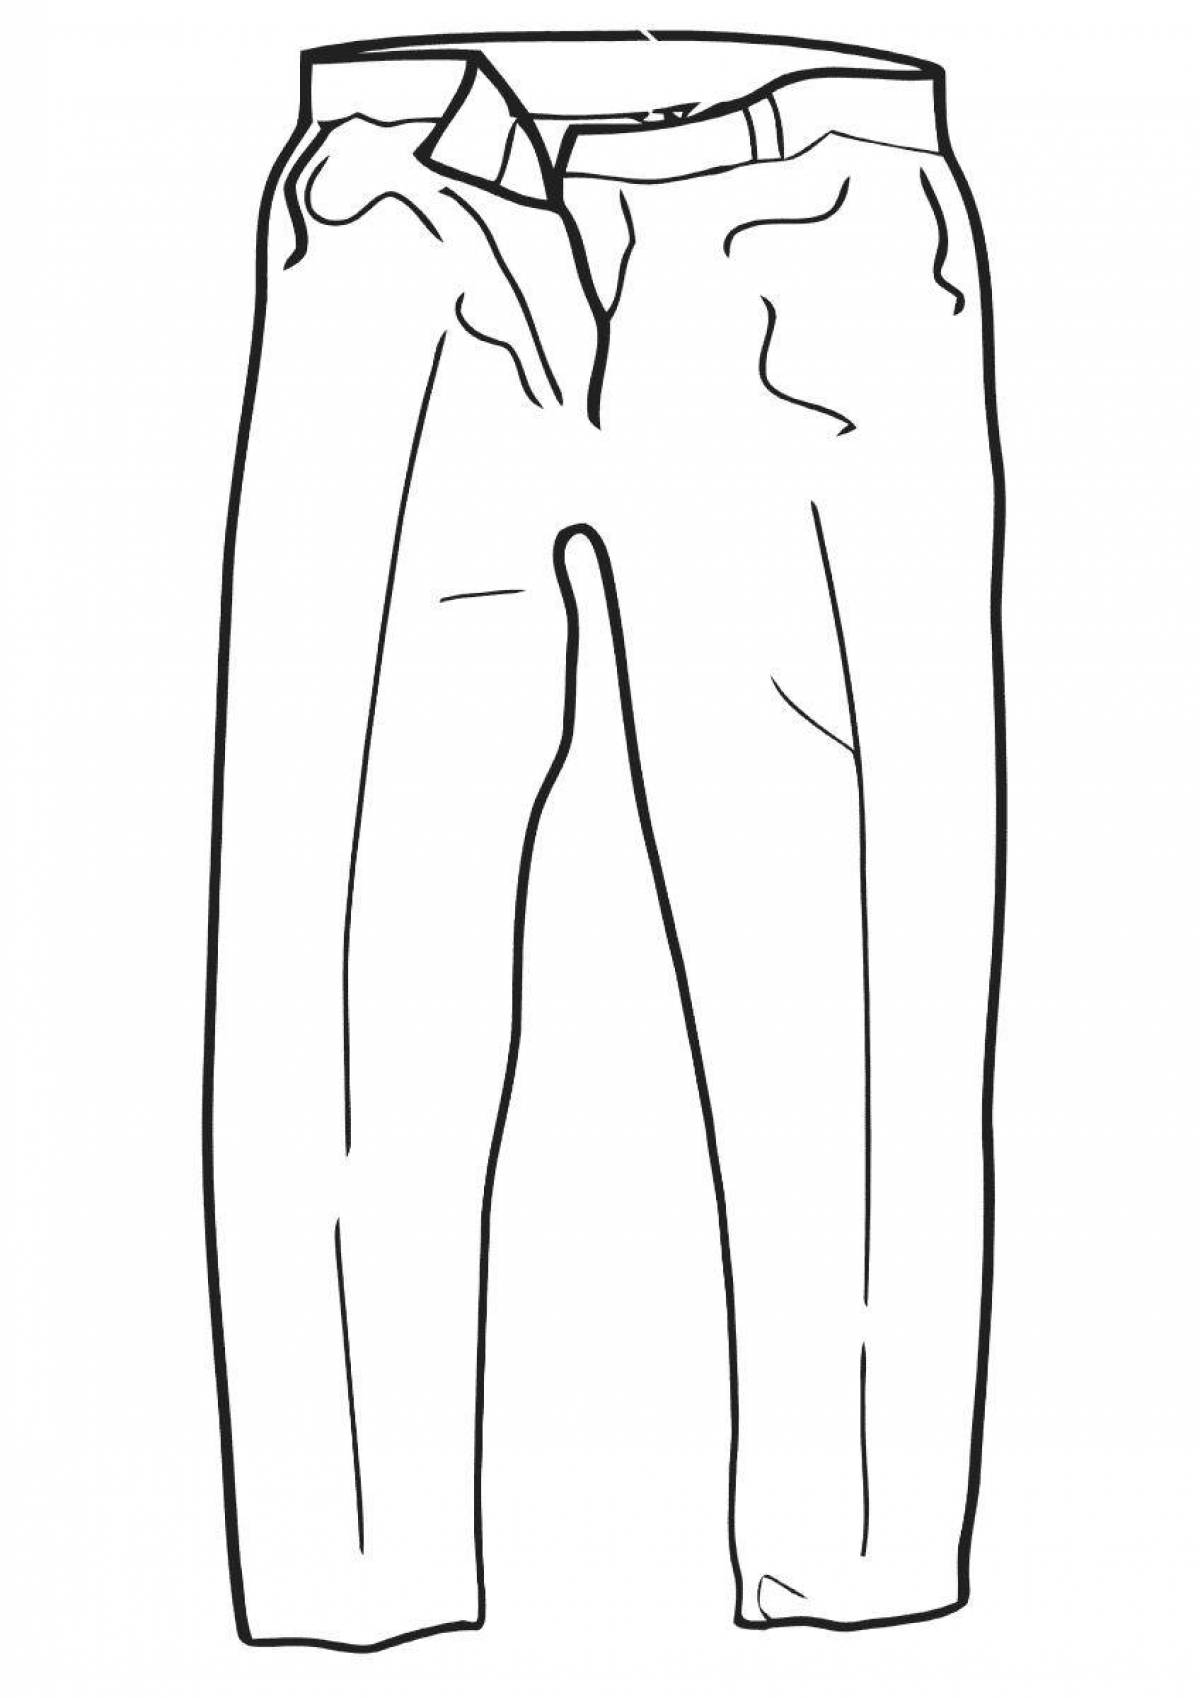 Coloring page funny trousers